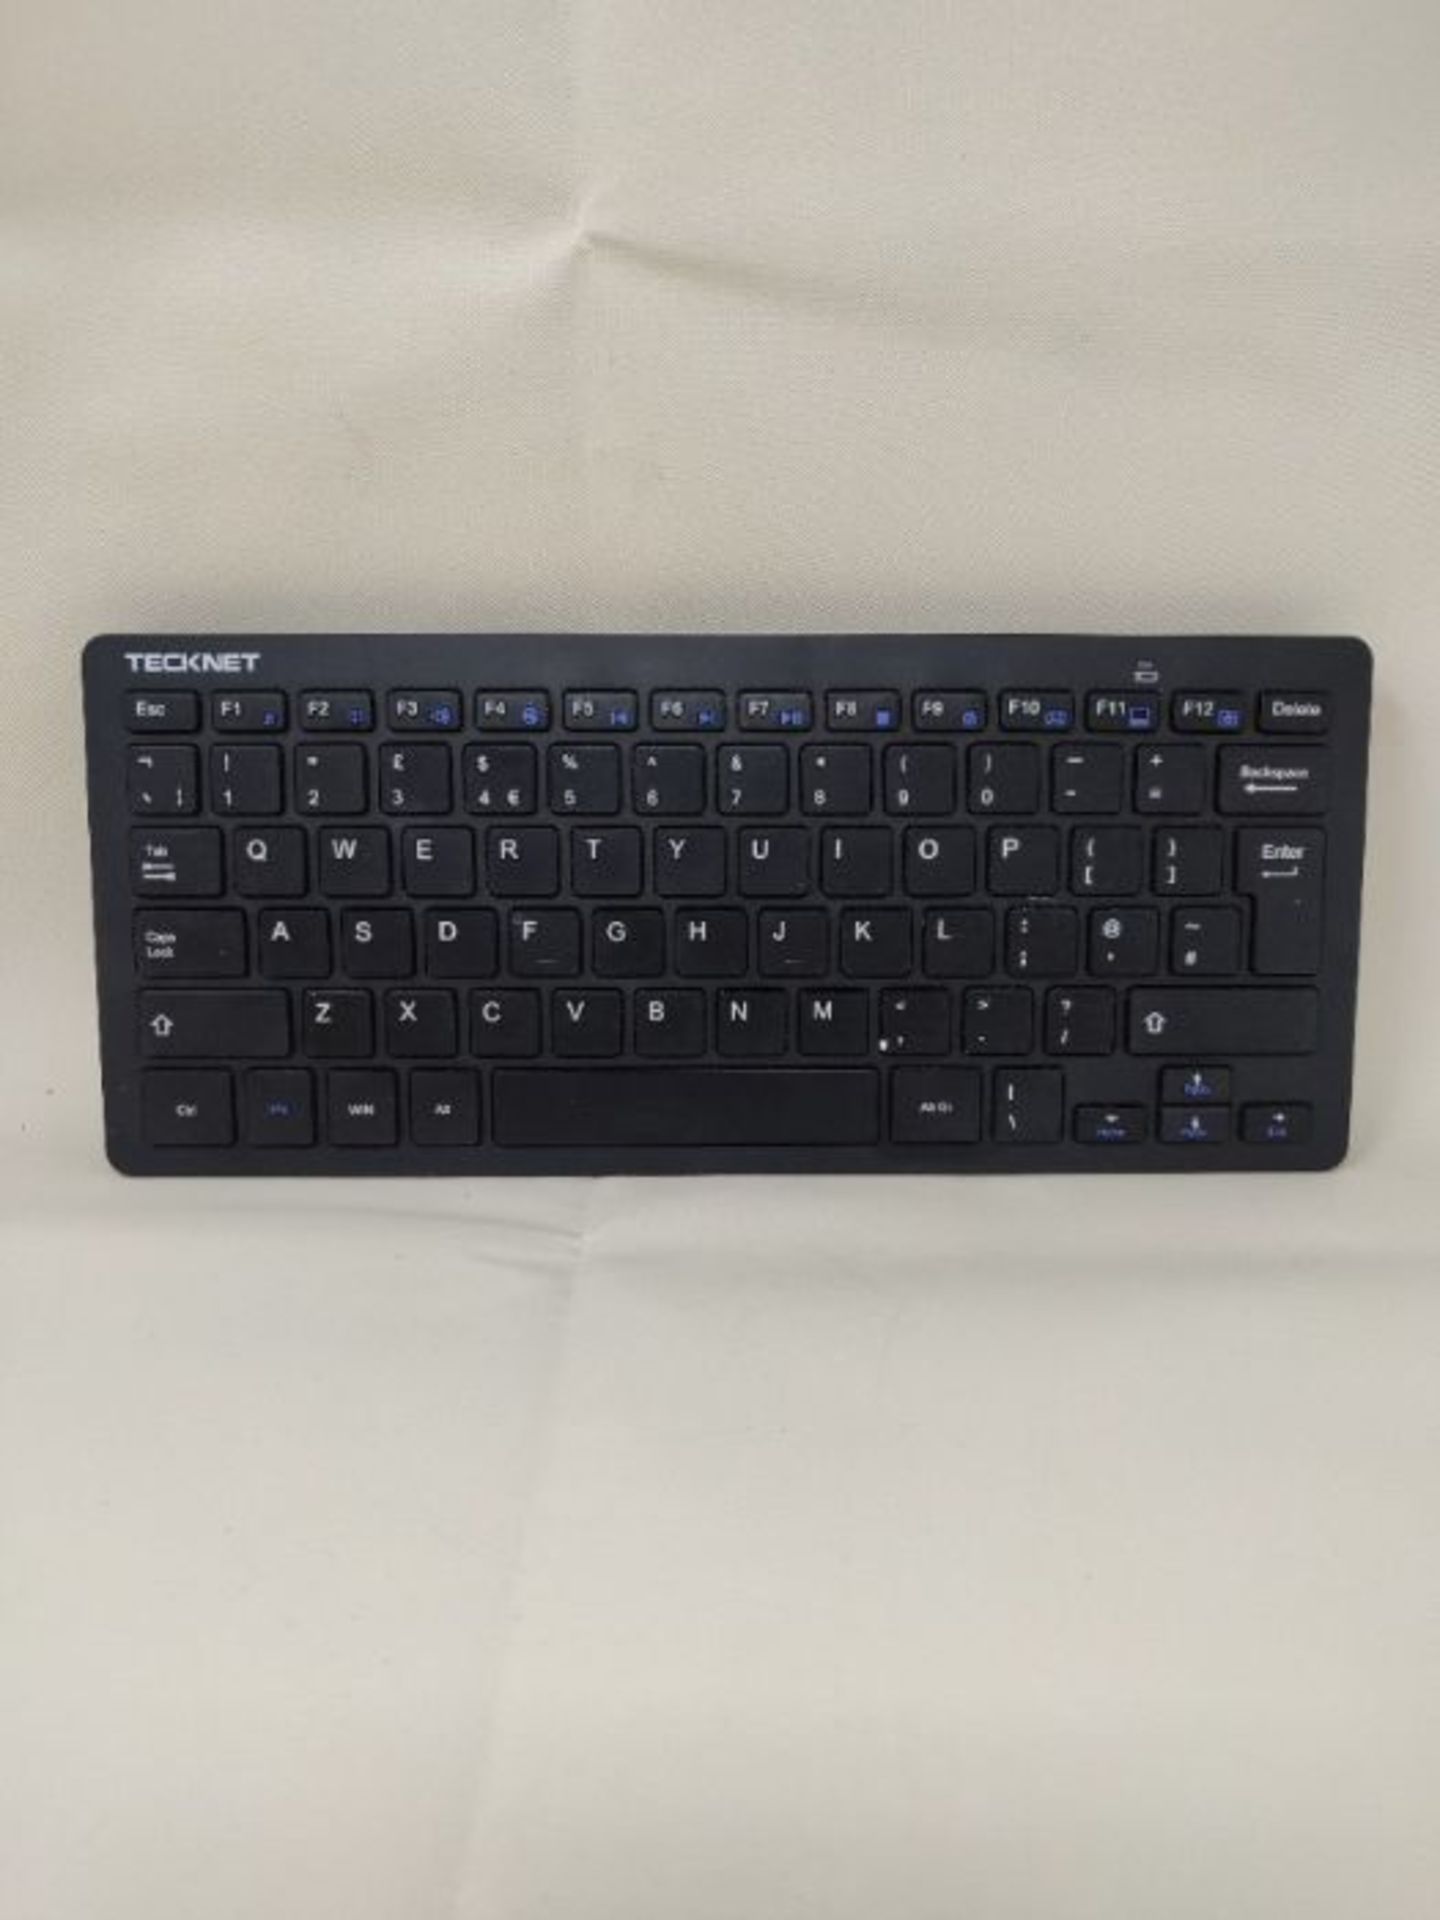 [INCOMPLETE] TECKNET 2.4G Wireless Keyboard For Windows 10/8/7/Vista/XP and Android Sm - Image 3 of 3